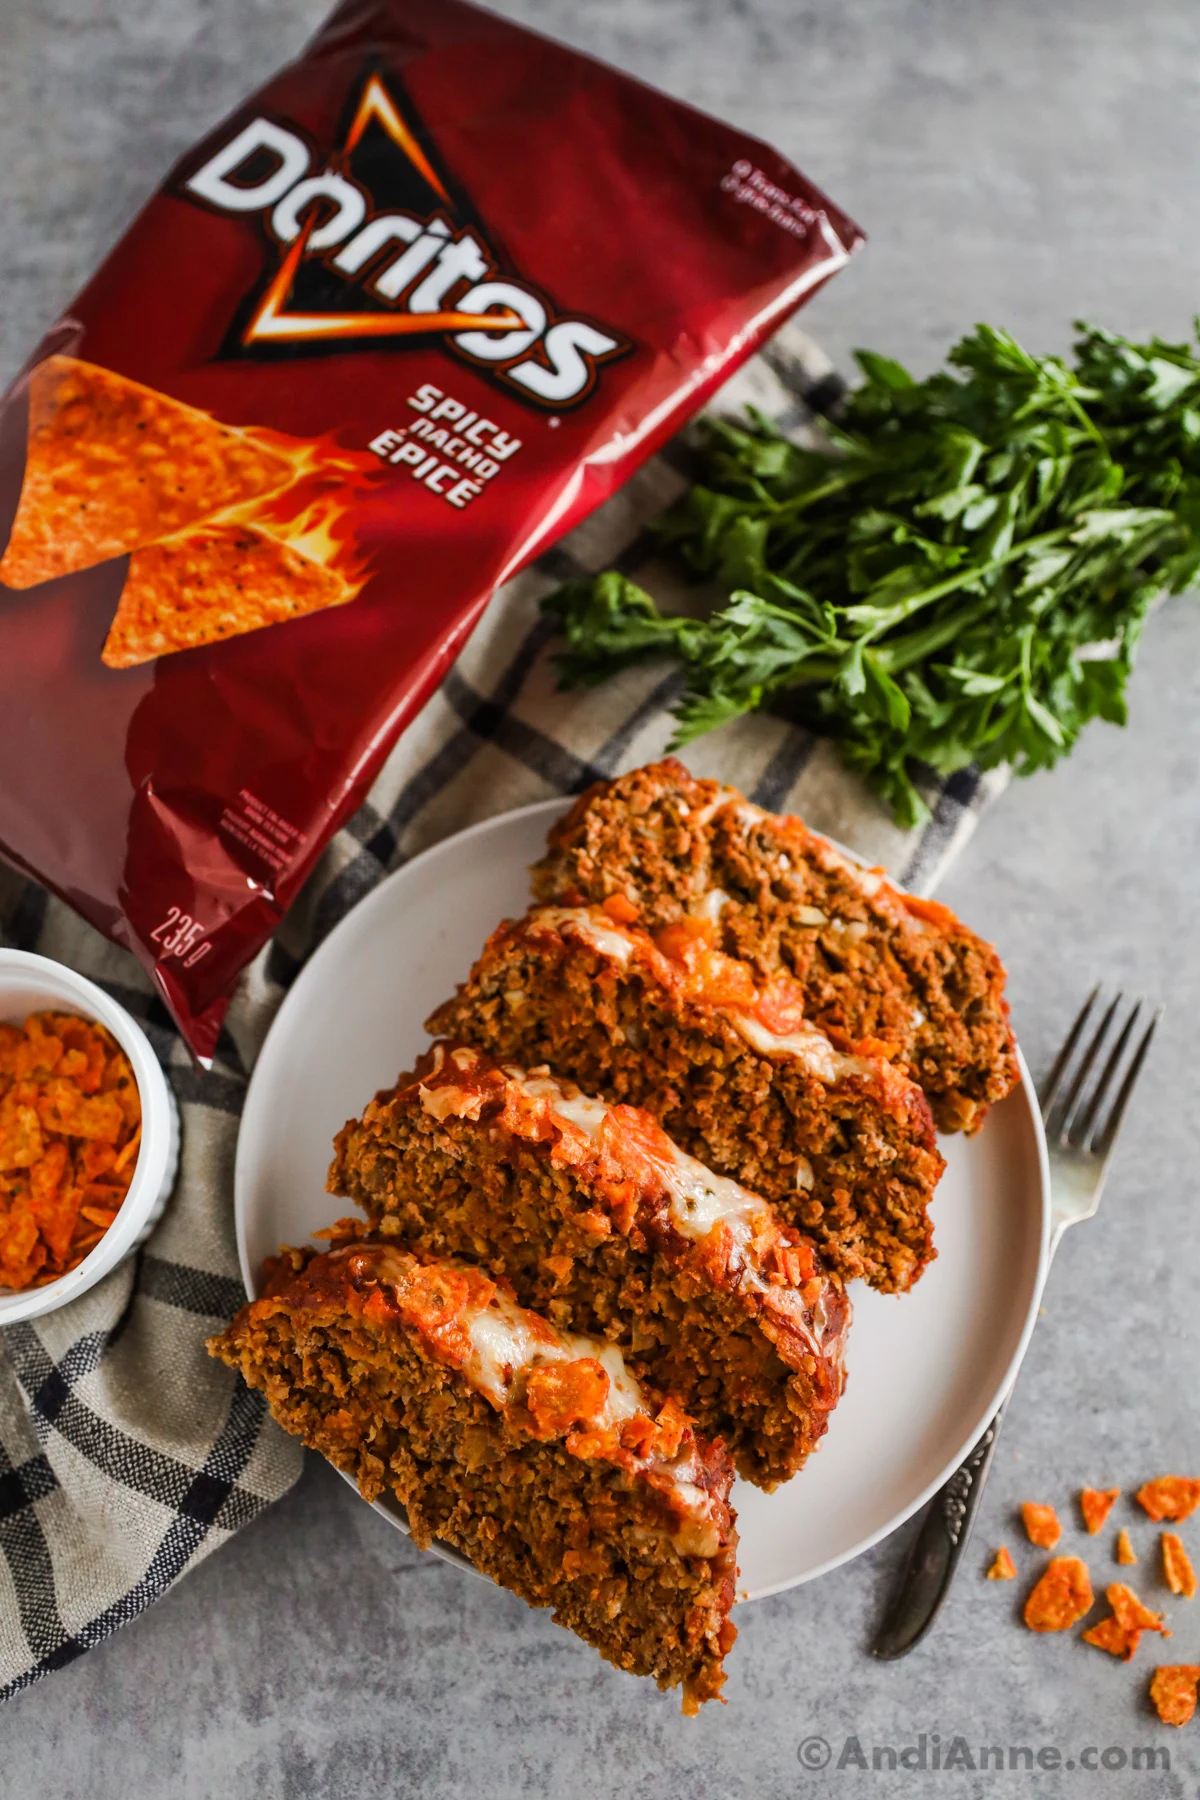 Slices of taco meatloaf on a white plate with a bag of Dorito nacho chips, parsley, fork and kitchen towel in background.